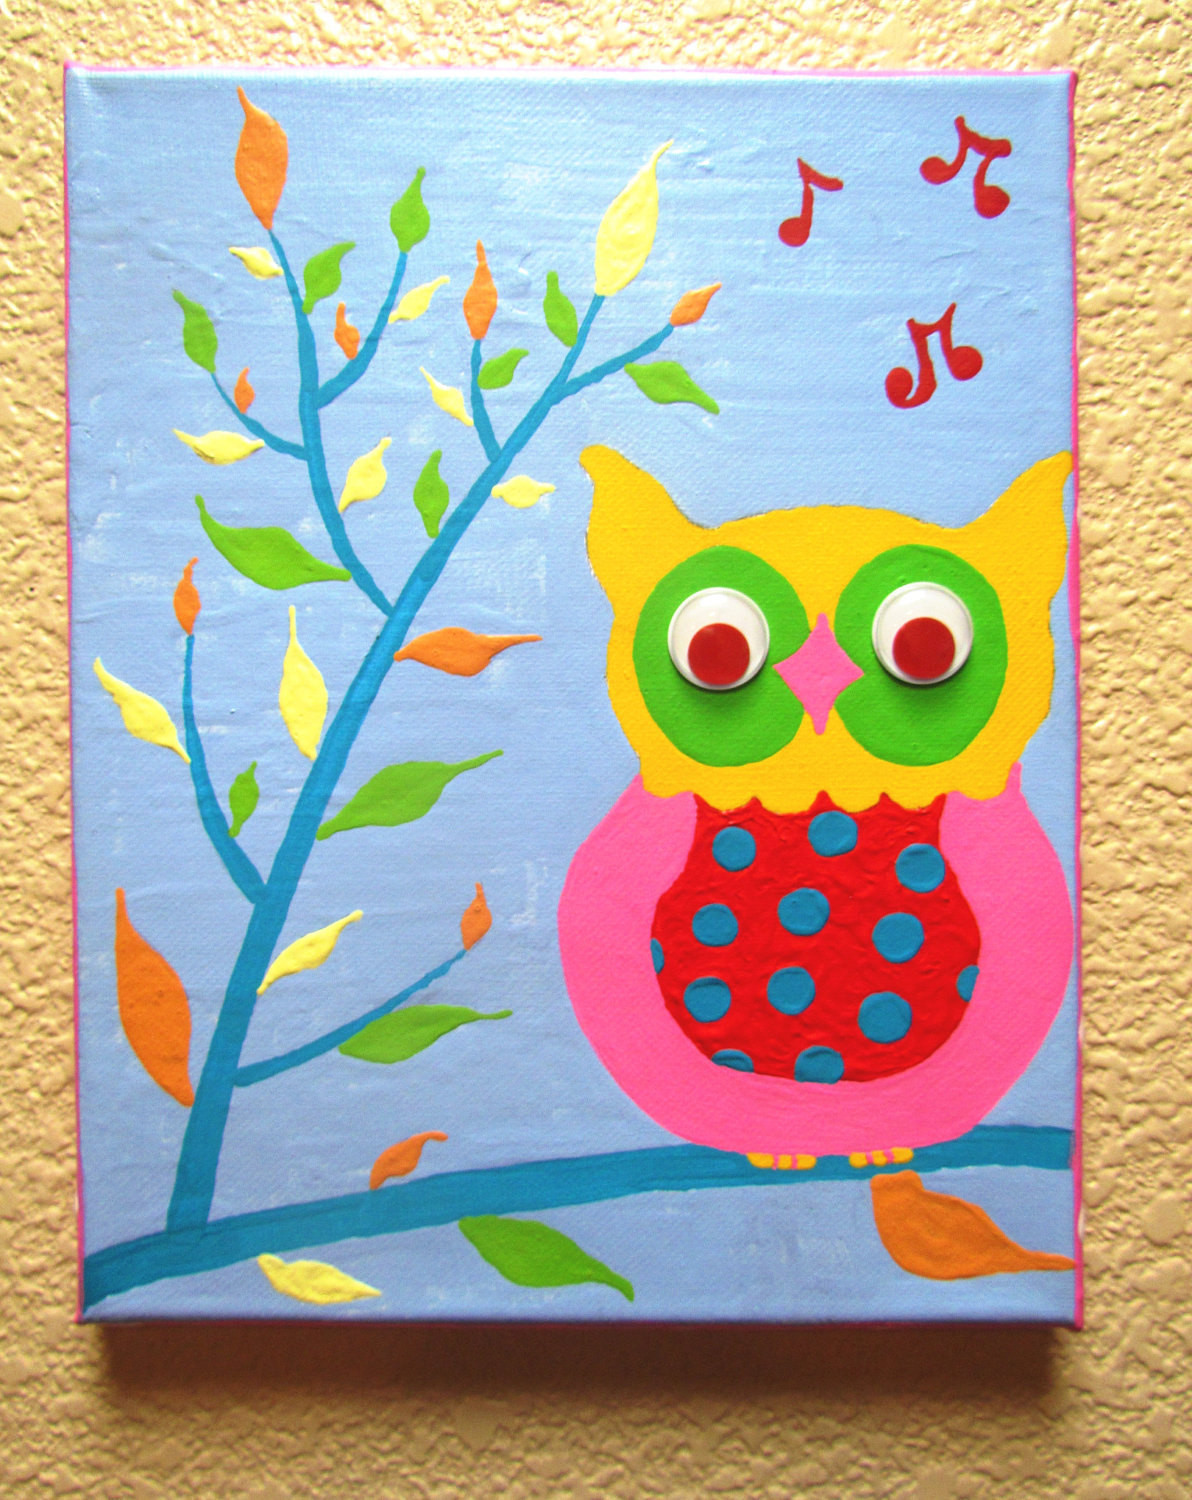 Canvas Painting Ideas For Kids
 WISE OWL Hand painted Acrylic Painting on Canvas for Kids